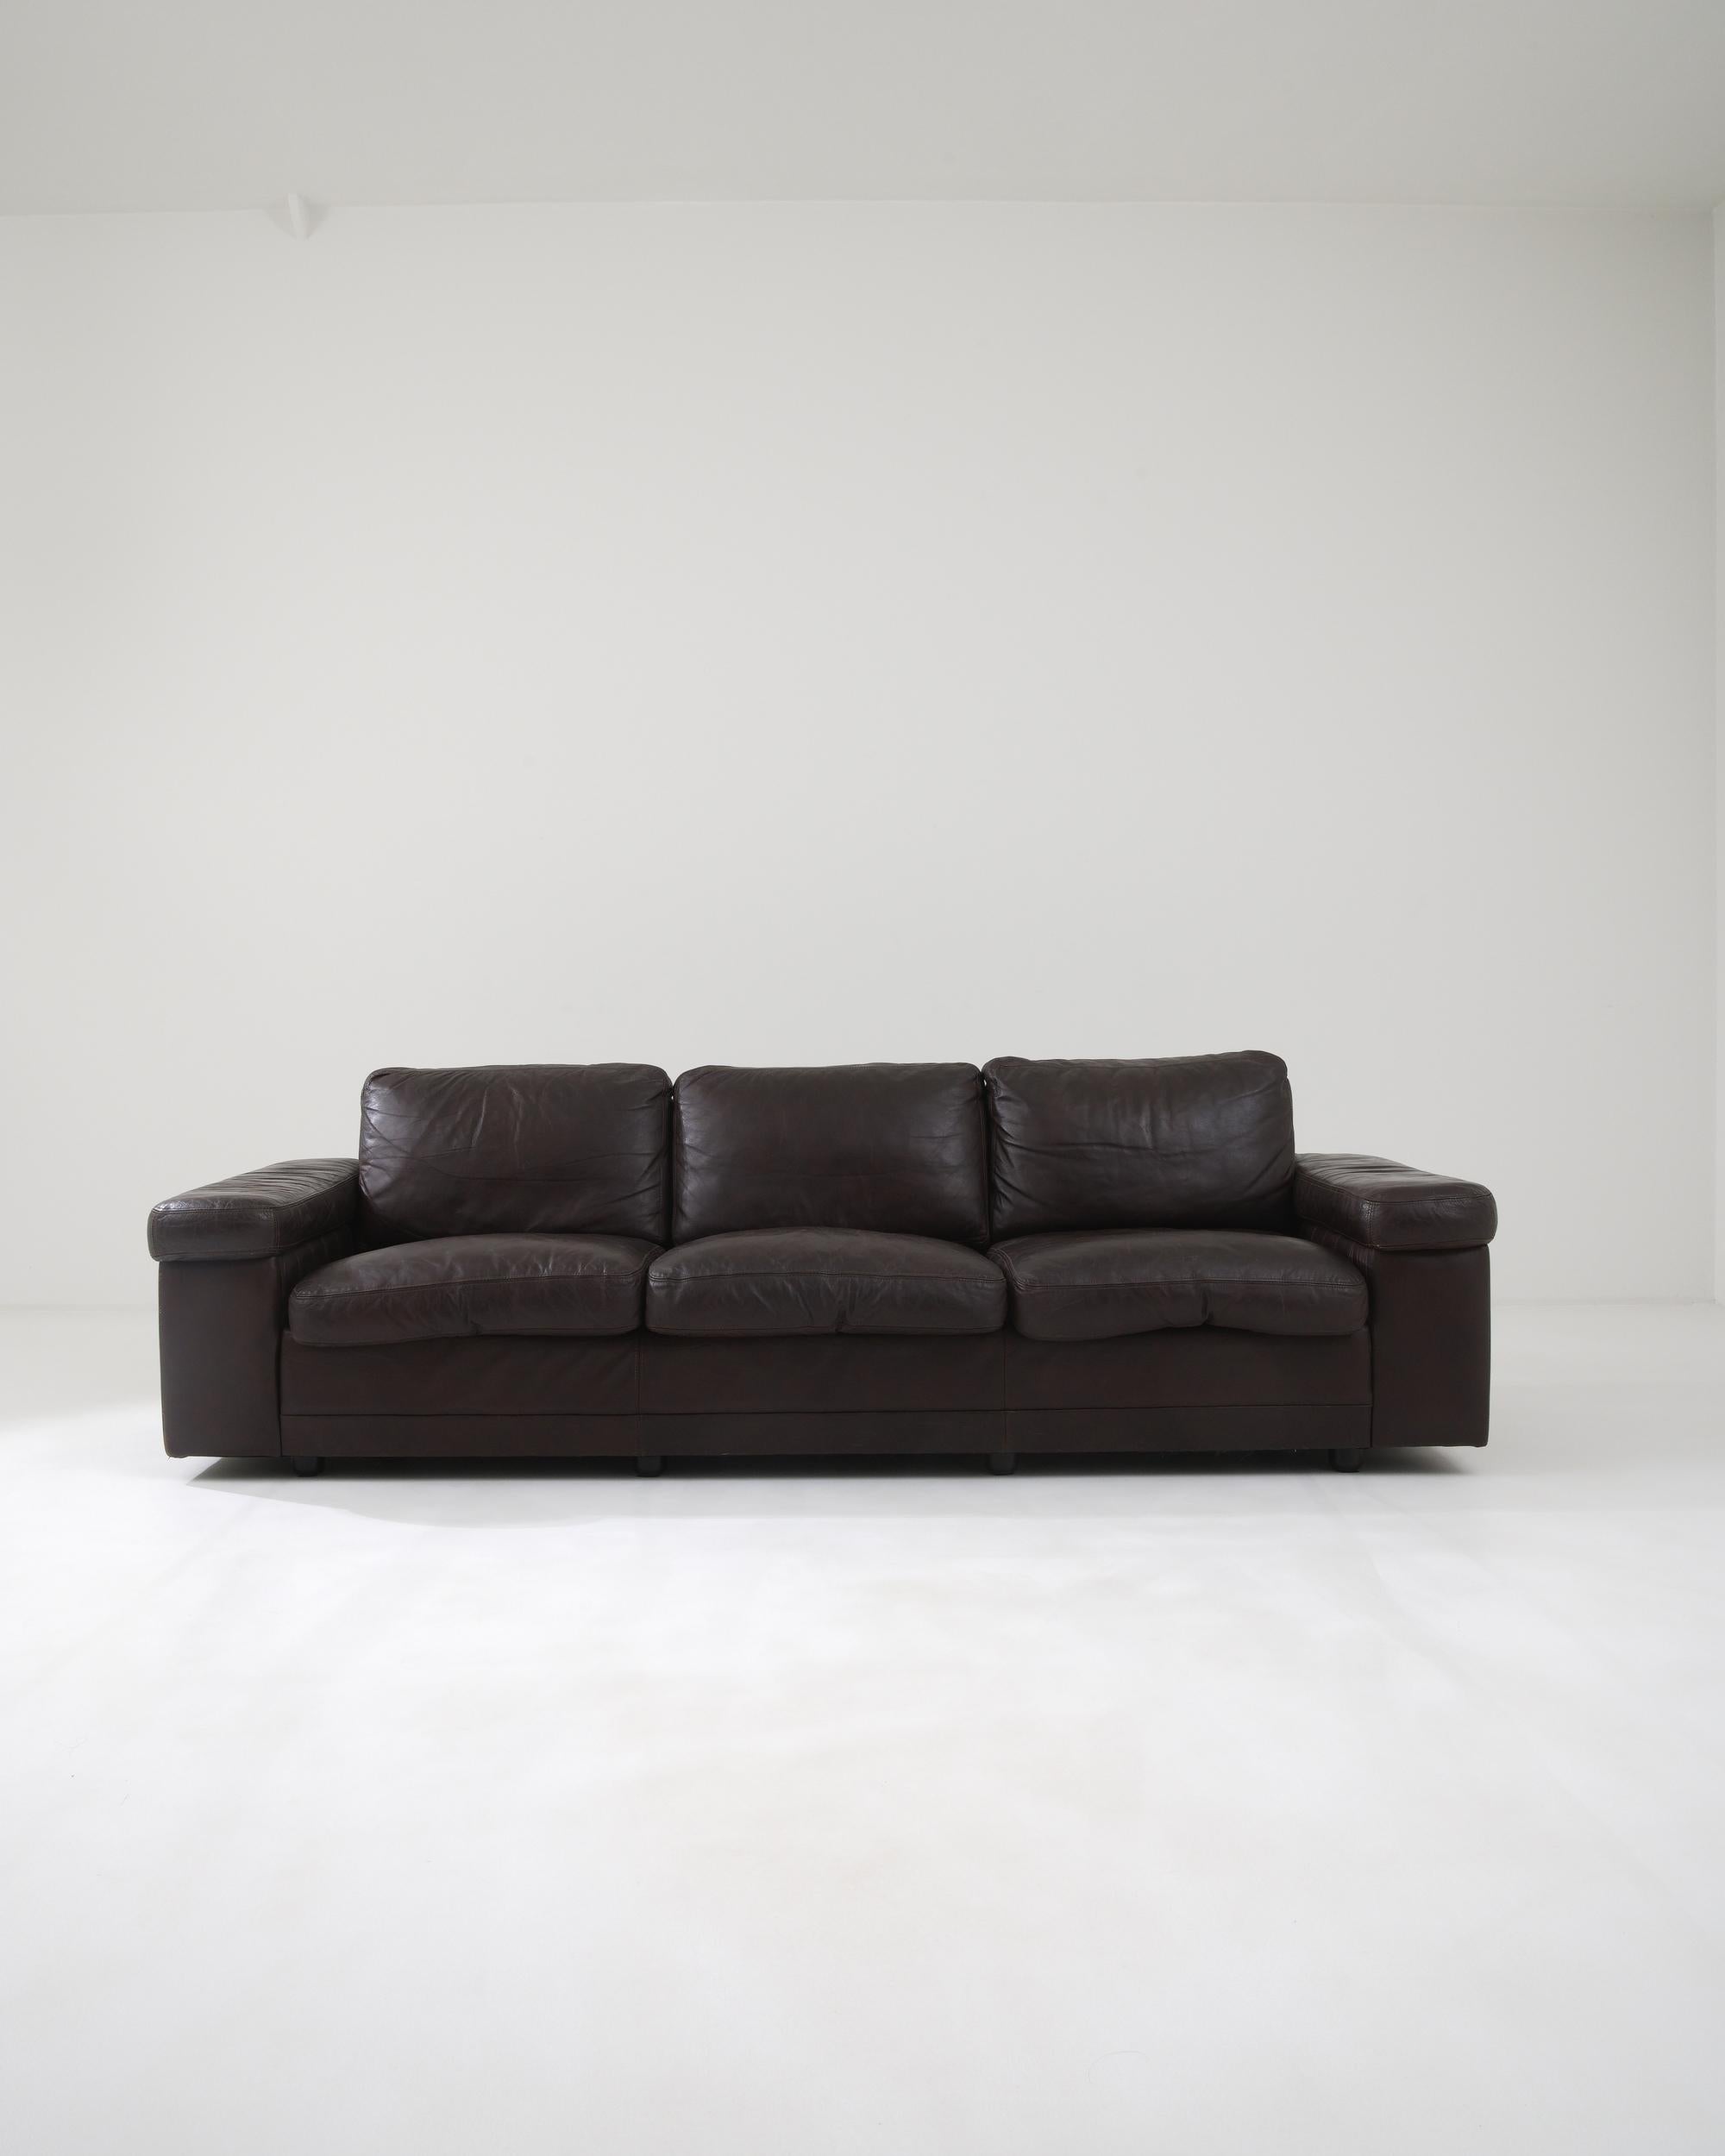 Made in Germany during the 20th century, this elegant three-seater sofa exudes classic appeal. The soft cushions, wrapped in luxurious dark brown leather, are braced with wide geometric arms, offering a perfect balance of style and comfort.